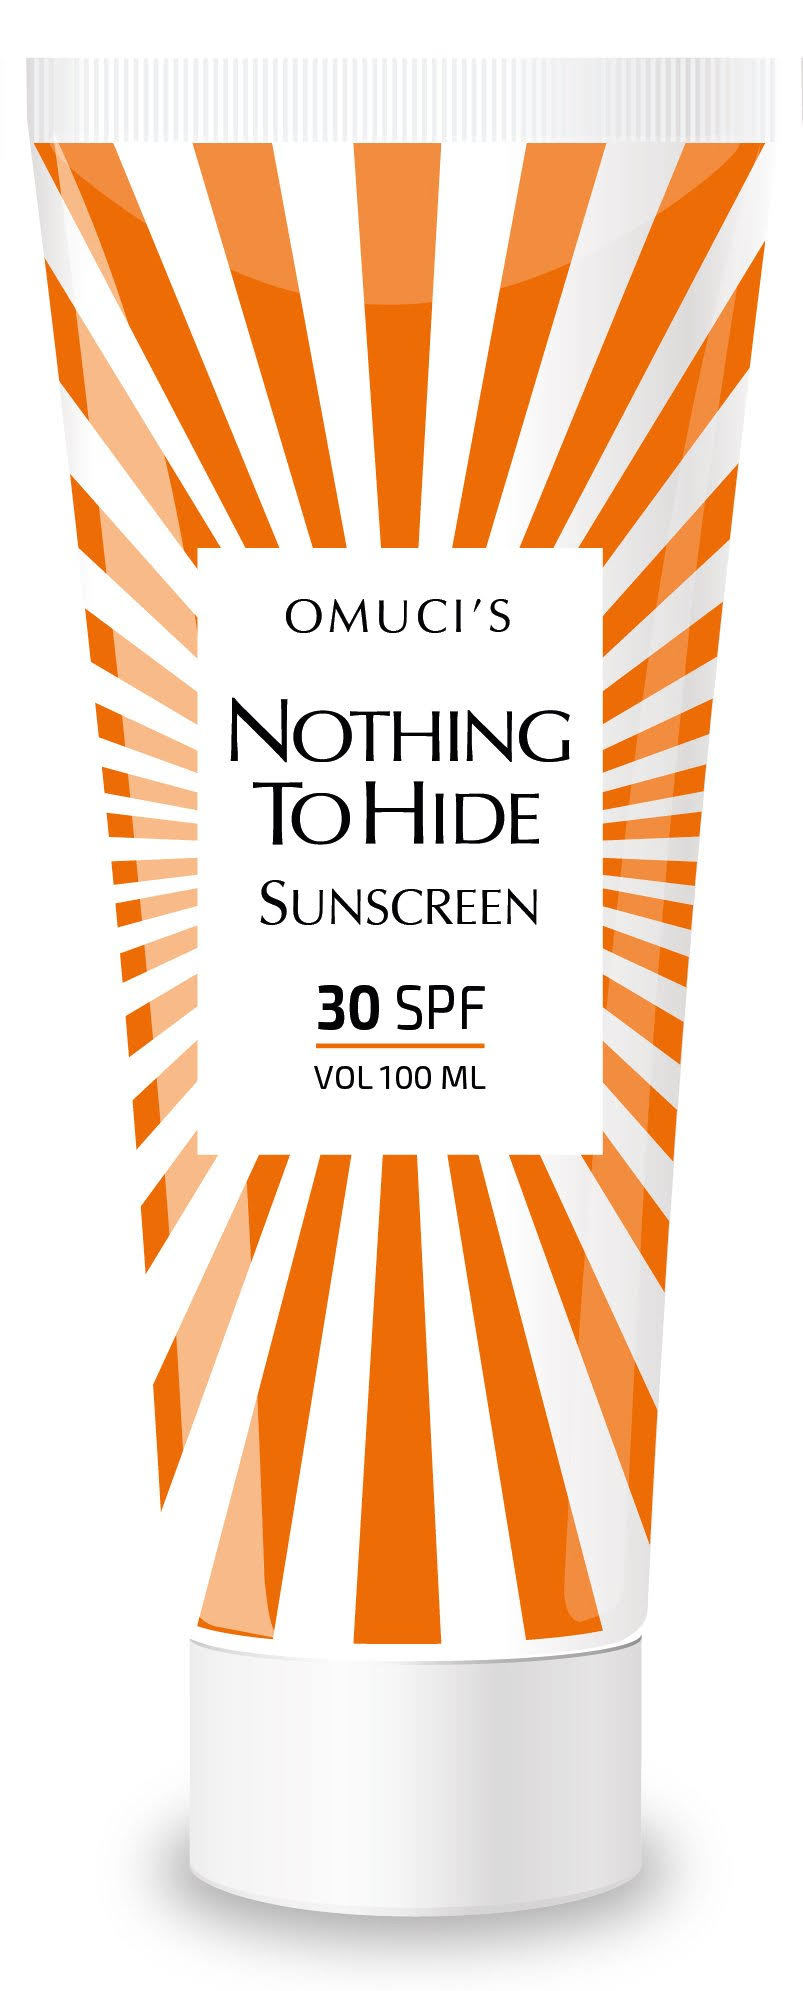 Omucis Nothing to Hide Eco Friendly Suncream. Vegan Friendly, Natural Ingredients. UVA + UVB Protection (100 ml, 30 SPF)